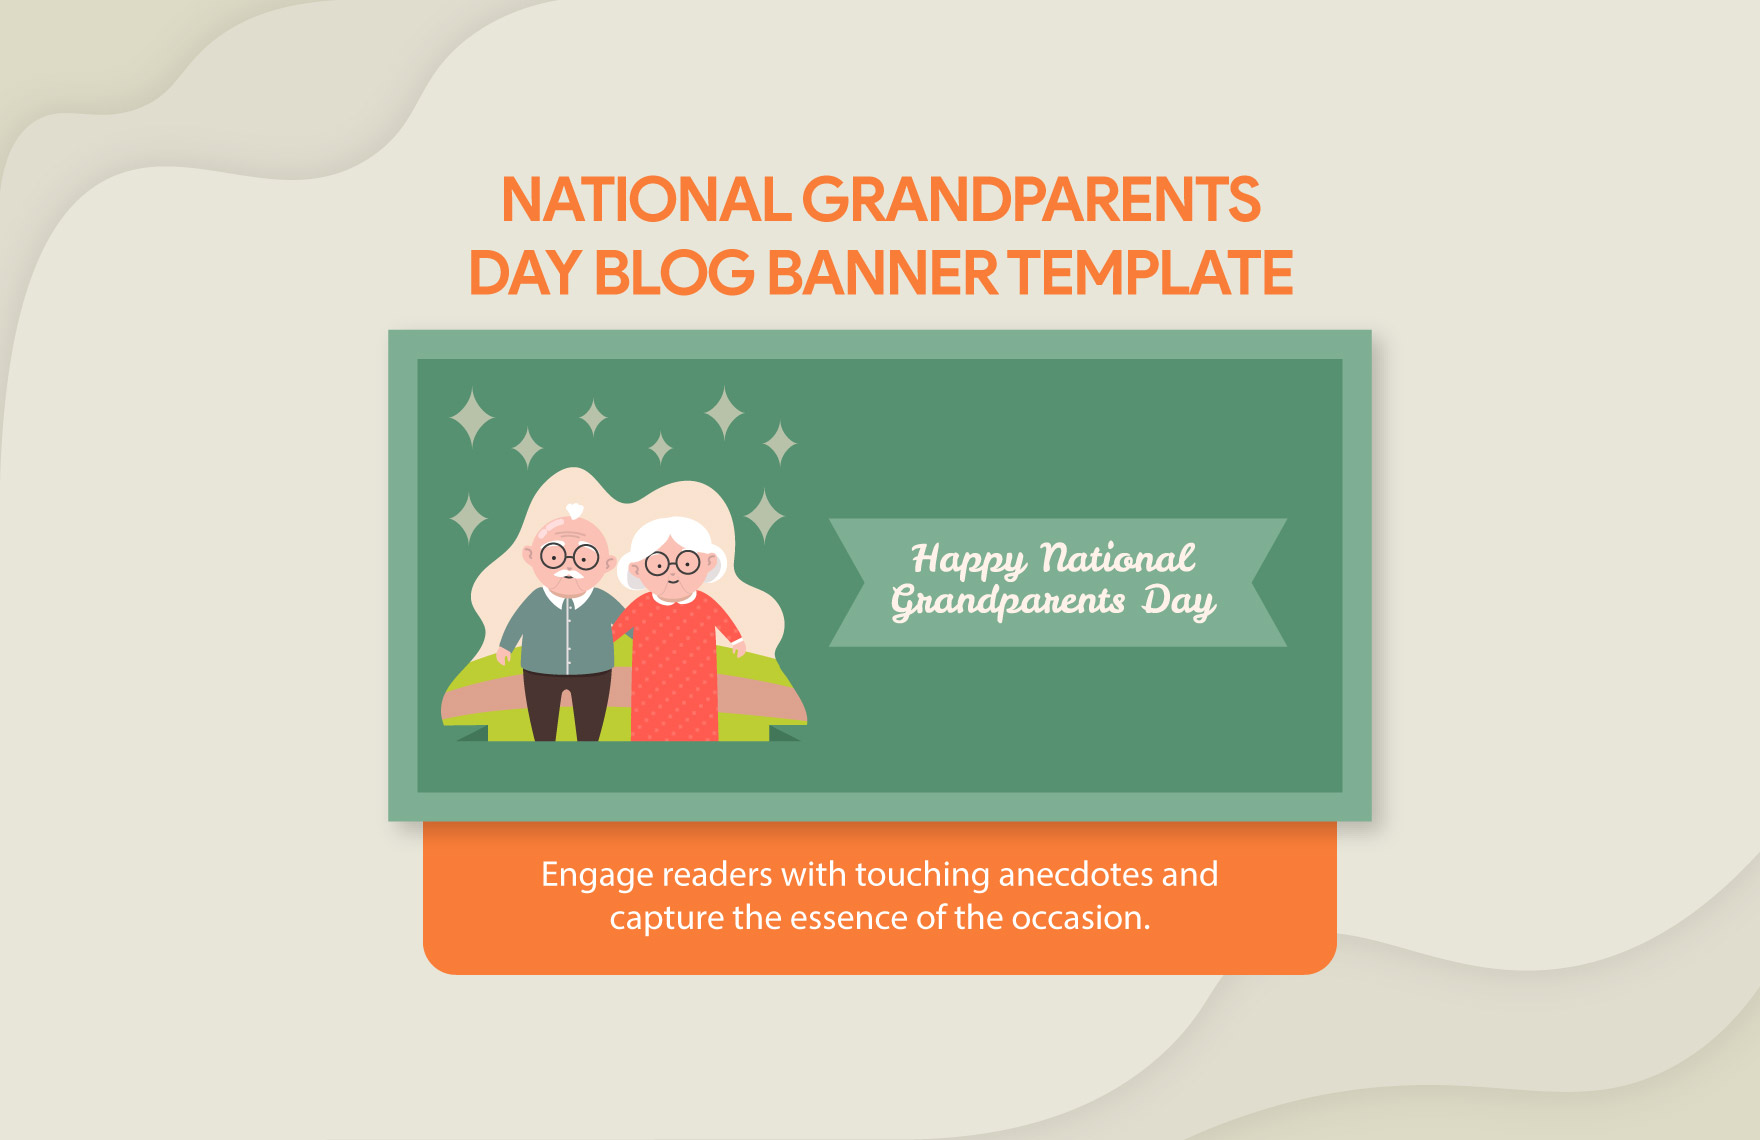 Free National Grandparents Day Blog Banner Template in Illustrator, PSD, PNG